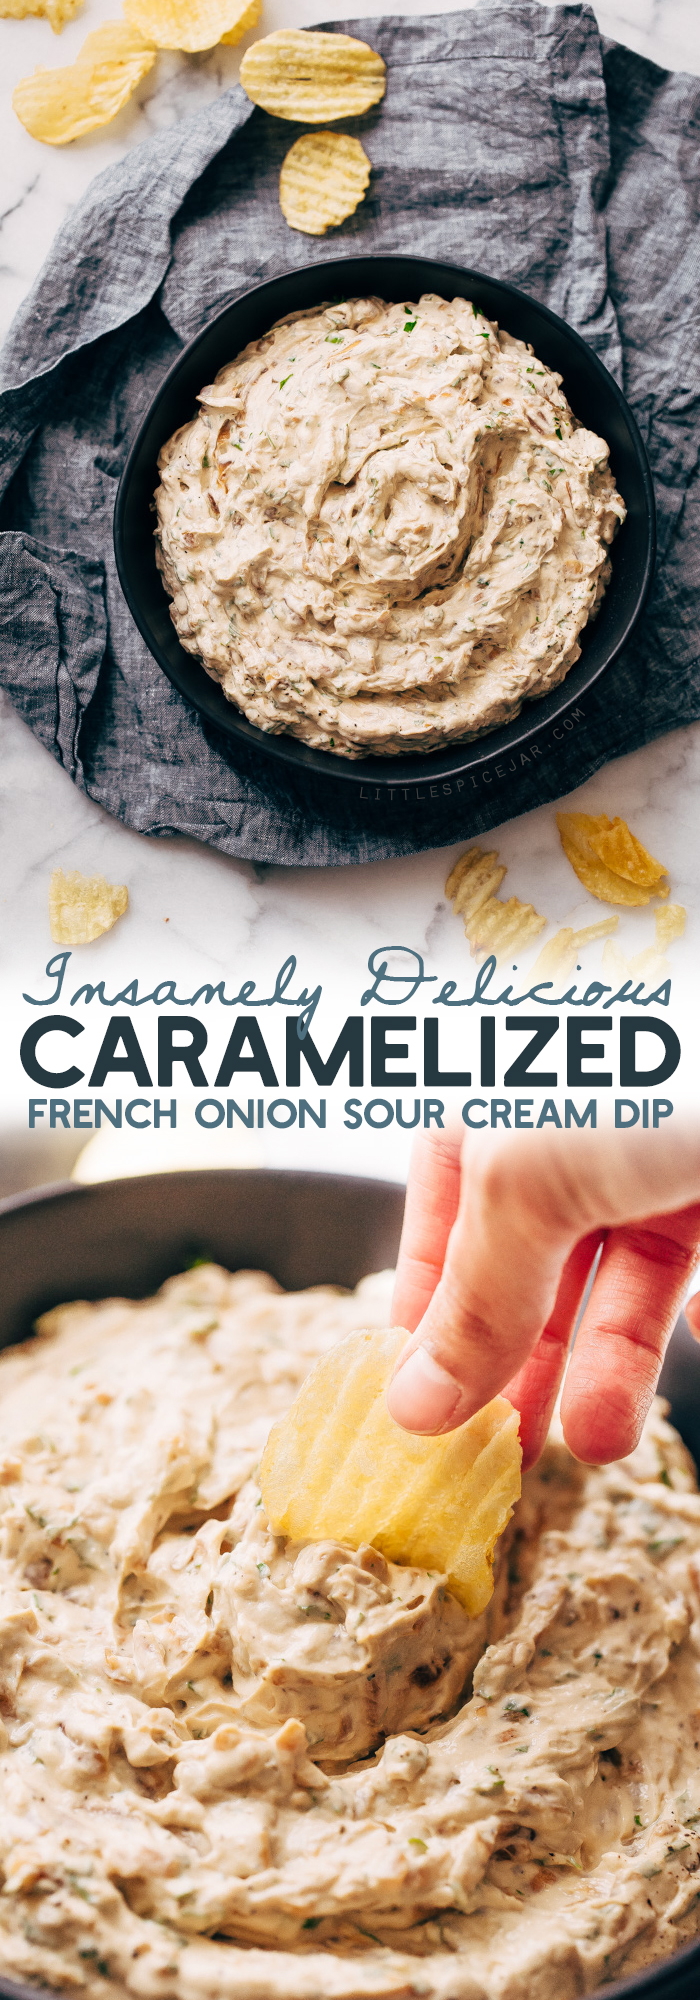 Caramelized Onion Dip - a simple dip that you can make ahead for parties and gatherings! Perfect for New Years Eve or any celebration! #caramelizedoniondip #frenchoniondip #oniondip #frenchcaramelizedoniondip | Littlespicejar.com